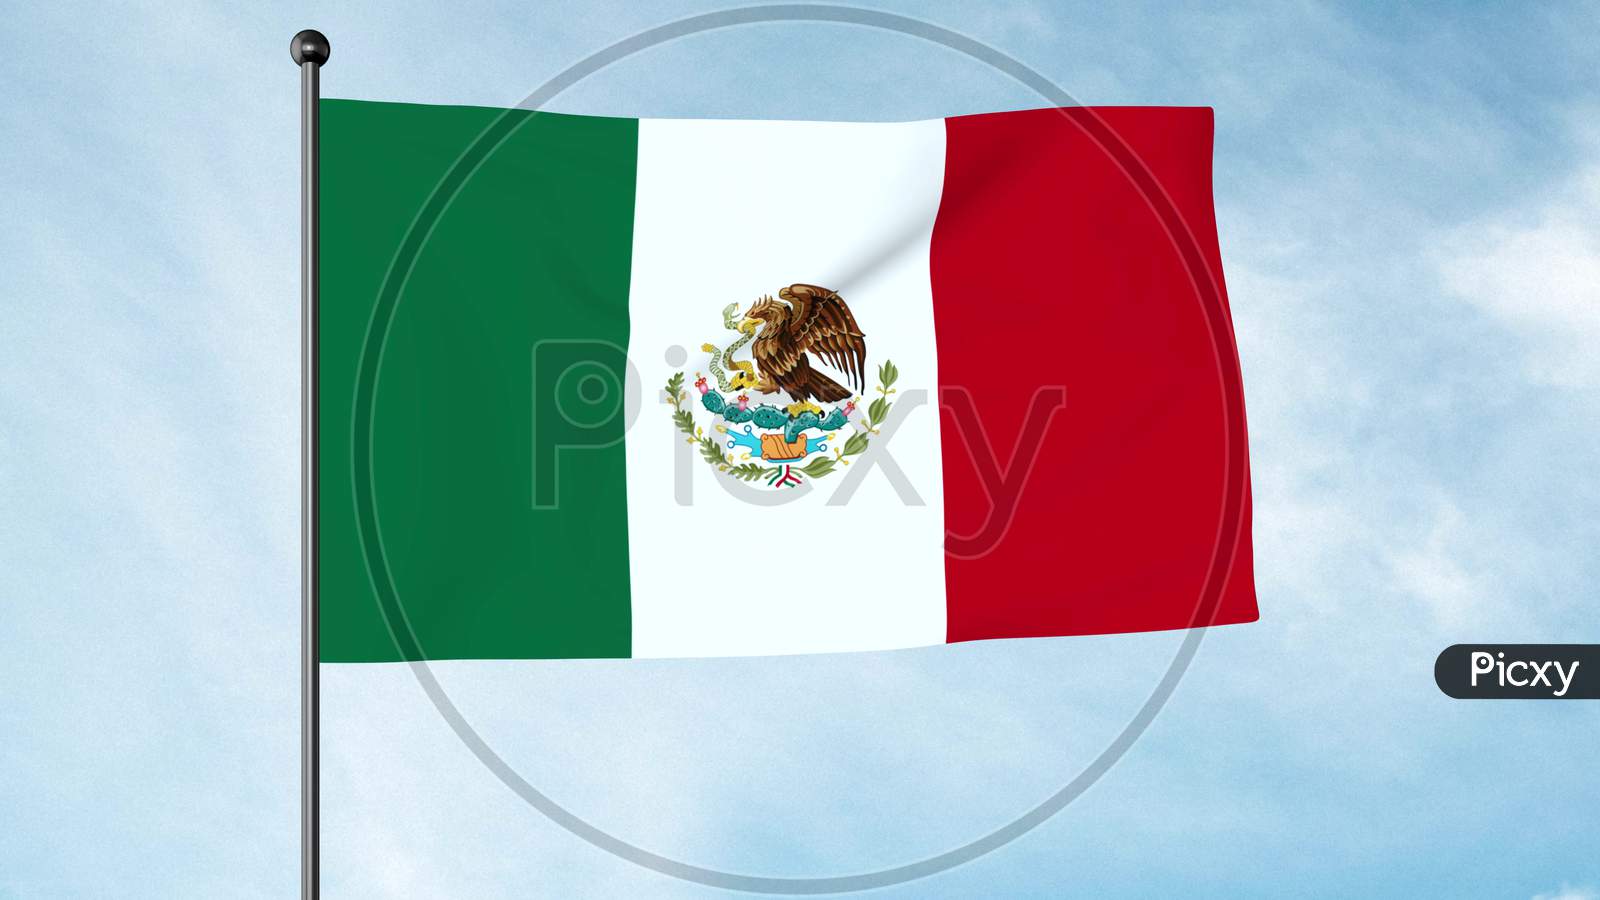 3D Illustration Of The Flag Of Mexico Is A Vertical Tricolour Of Green, White, And Red With The National Coat Of Arms Charged In The Centre Of The White Stripe.